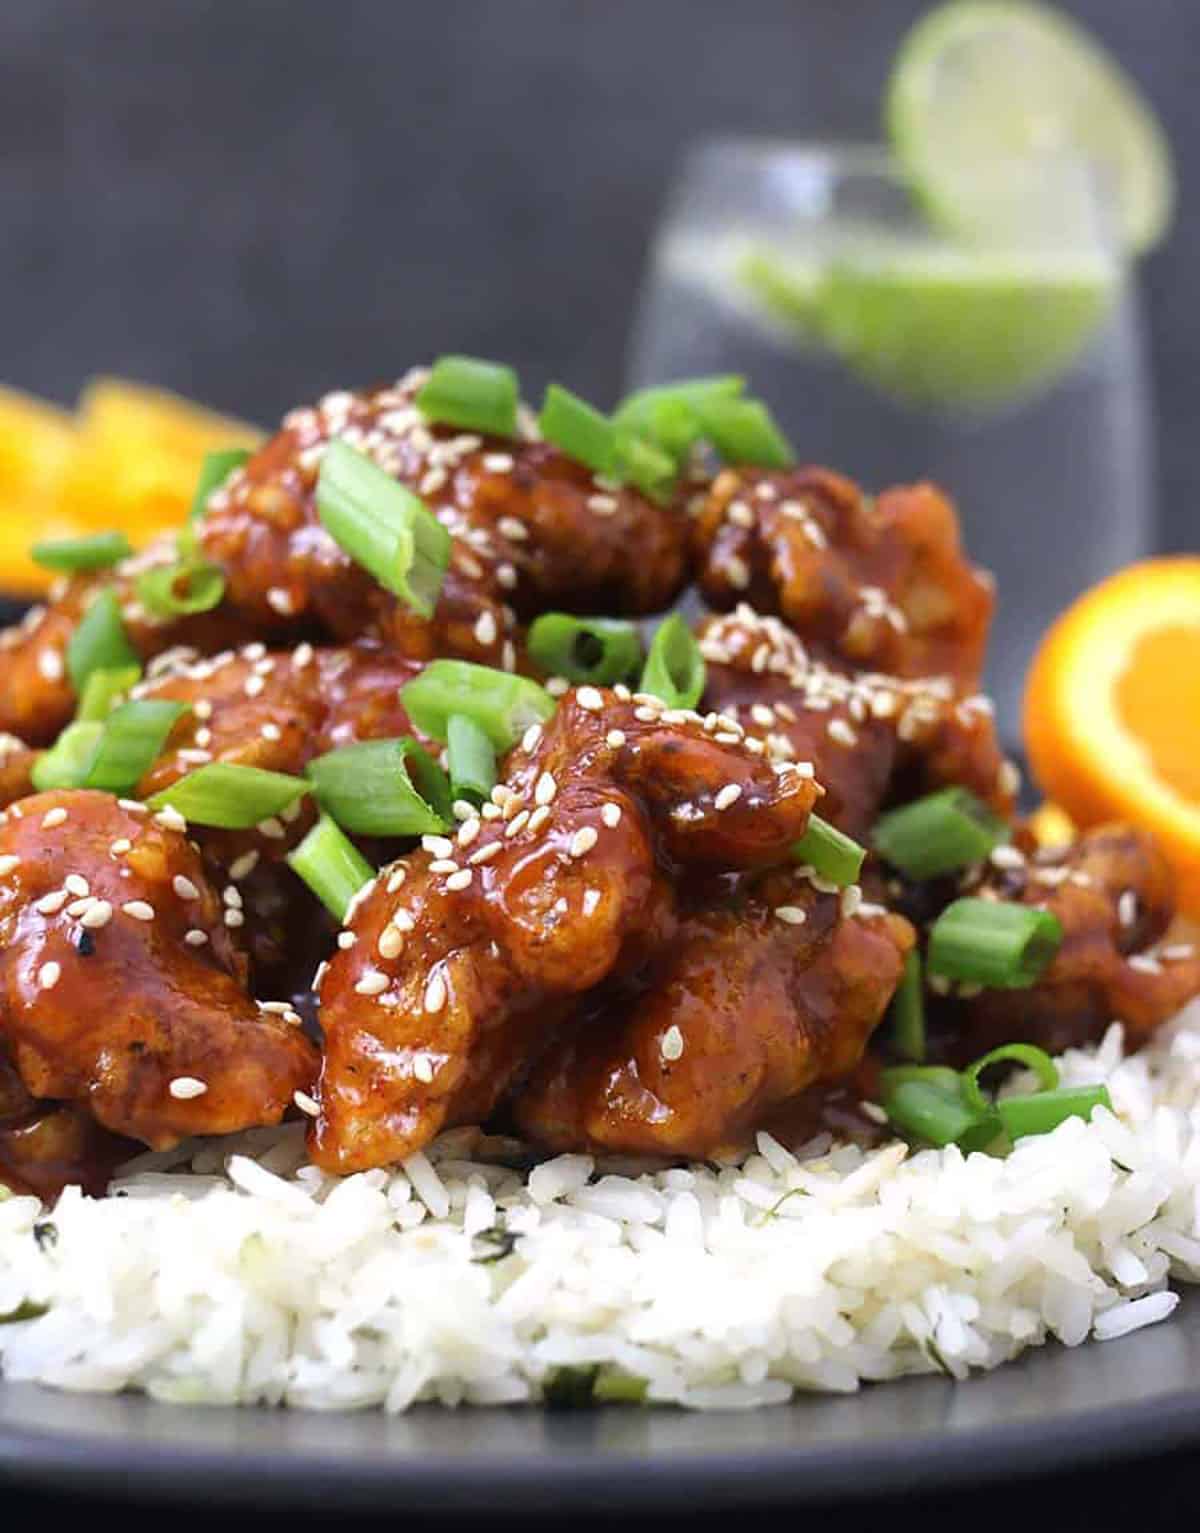 Orange chicken garnished with scallions and toasted sesame seeds served over a bed of steamed rice.